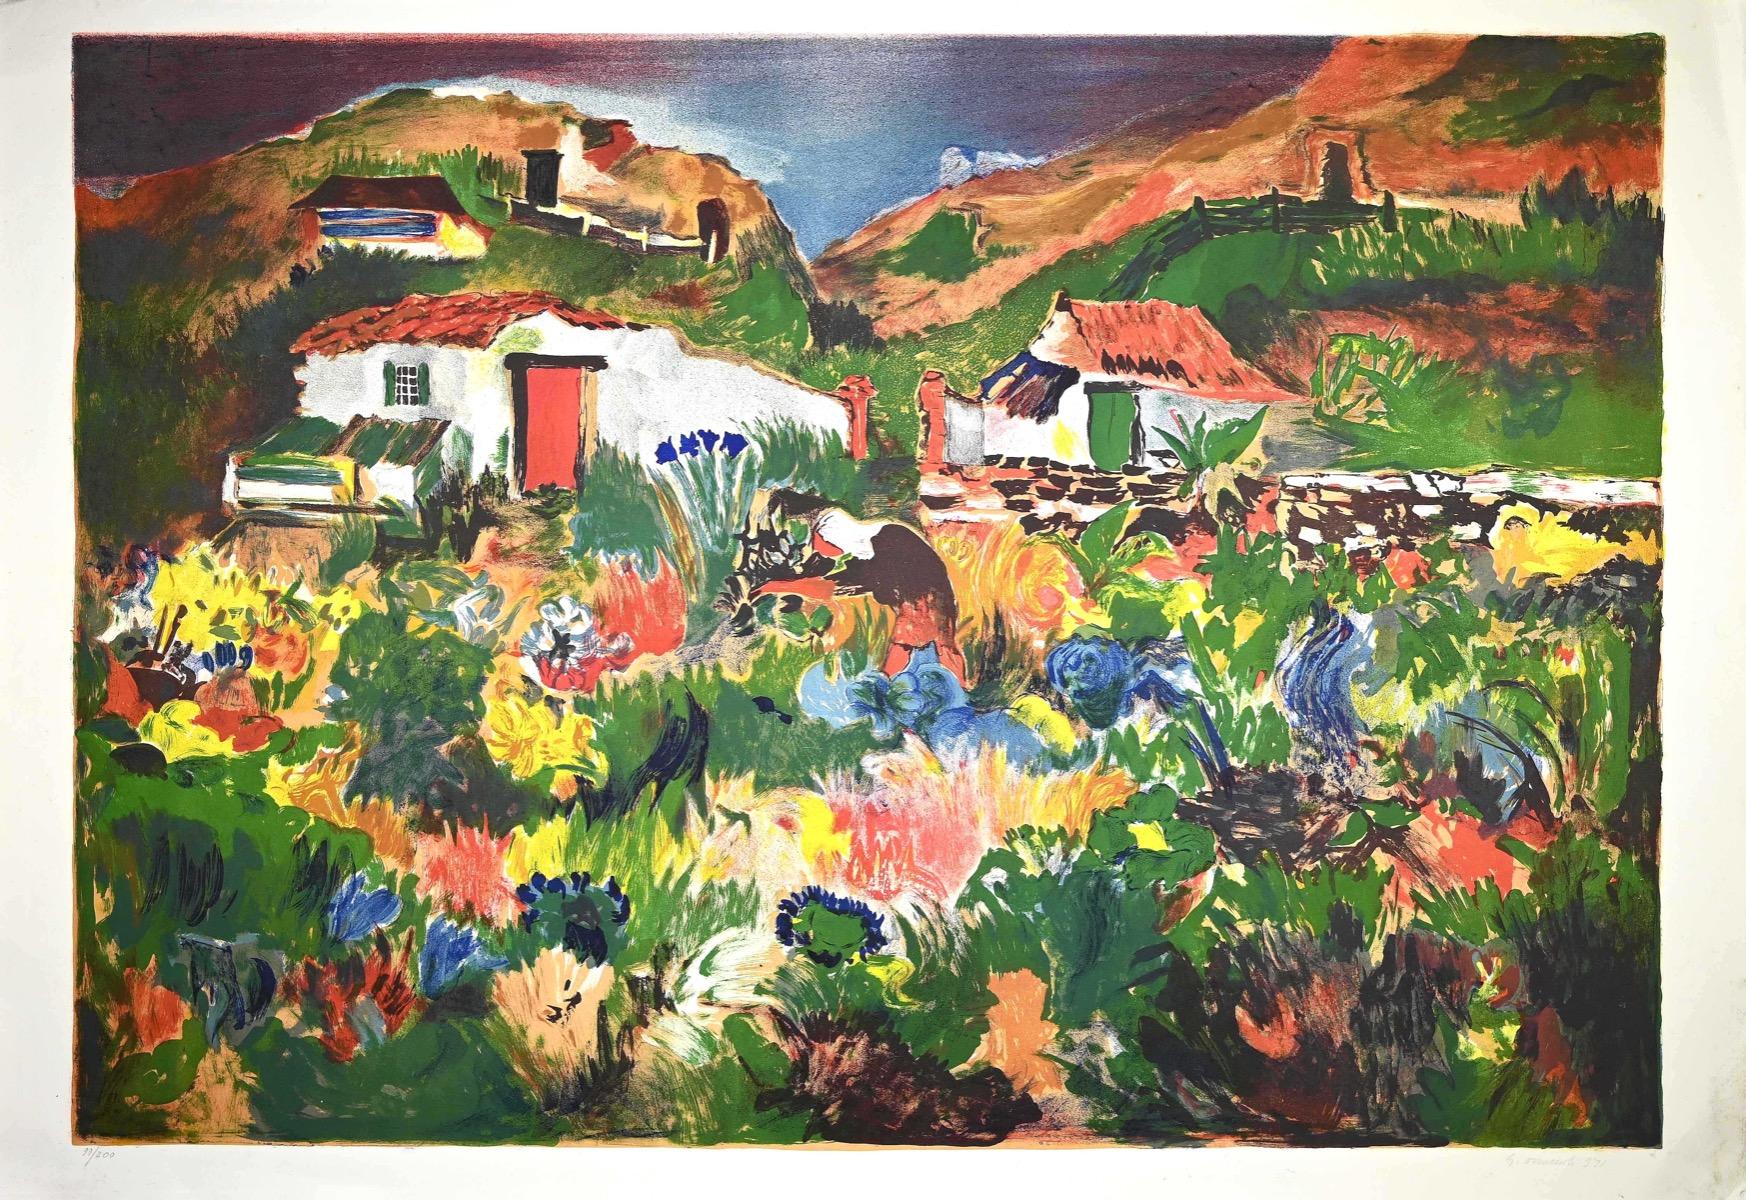 Gardens in Scilla is a beautiful original lithograph on cardboard, realized by the Italian artist Giovanni Omiccioli (Rome, 1901-1975) in 1971.

Signed and dated in pencil, on the lower margin.

In very good conditions, except for some minor holes